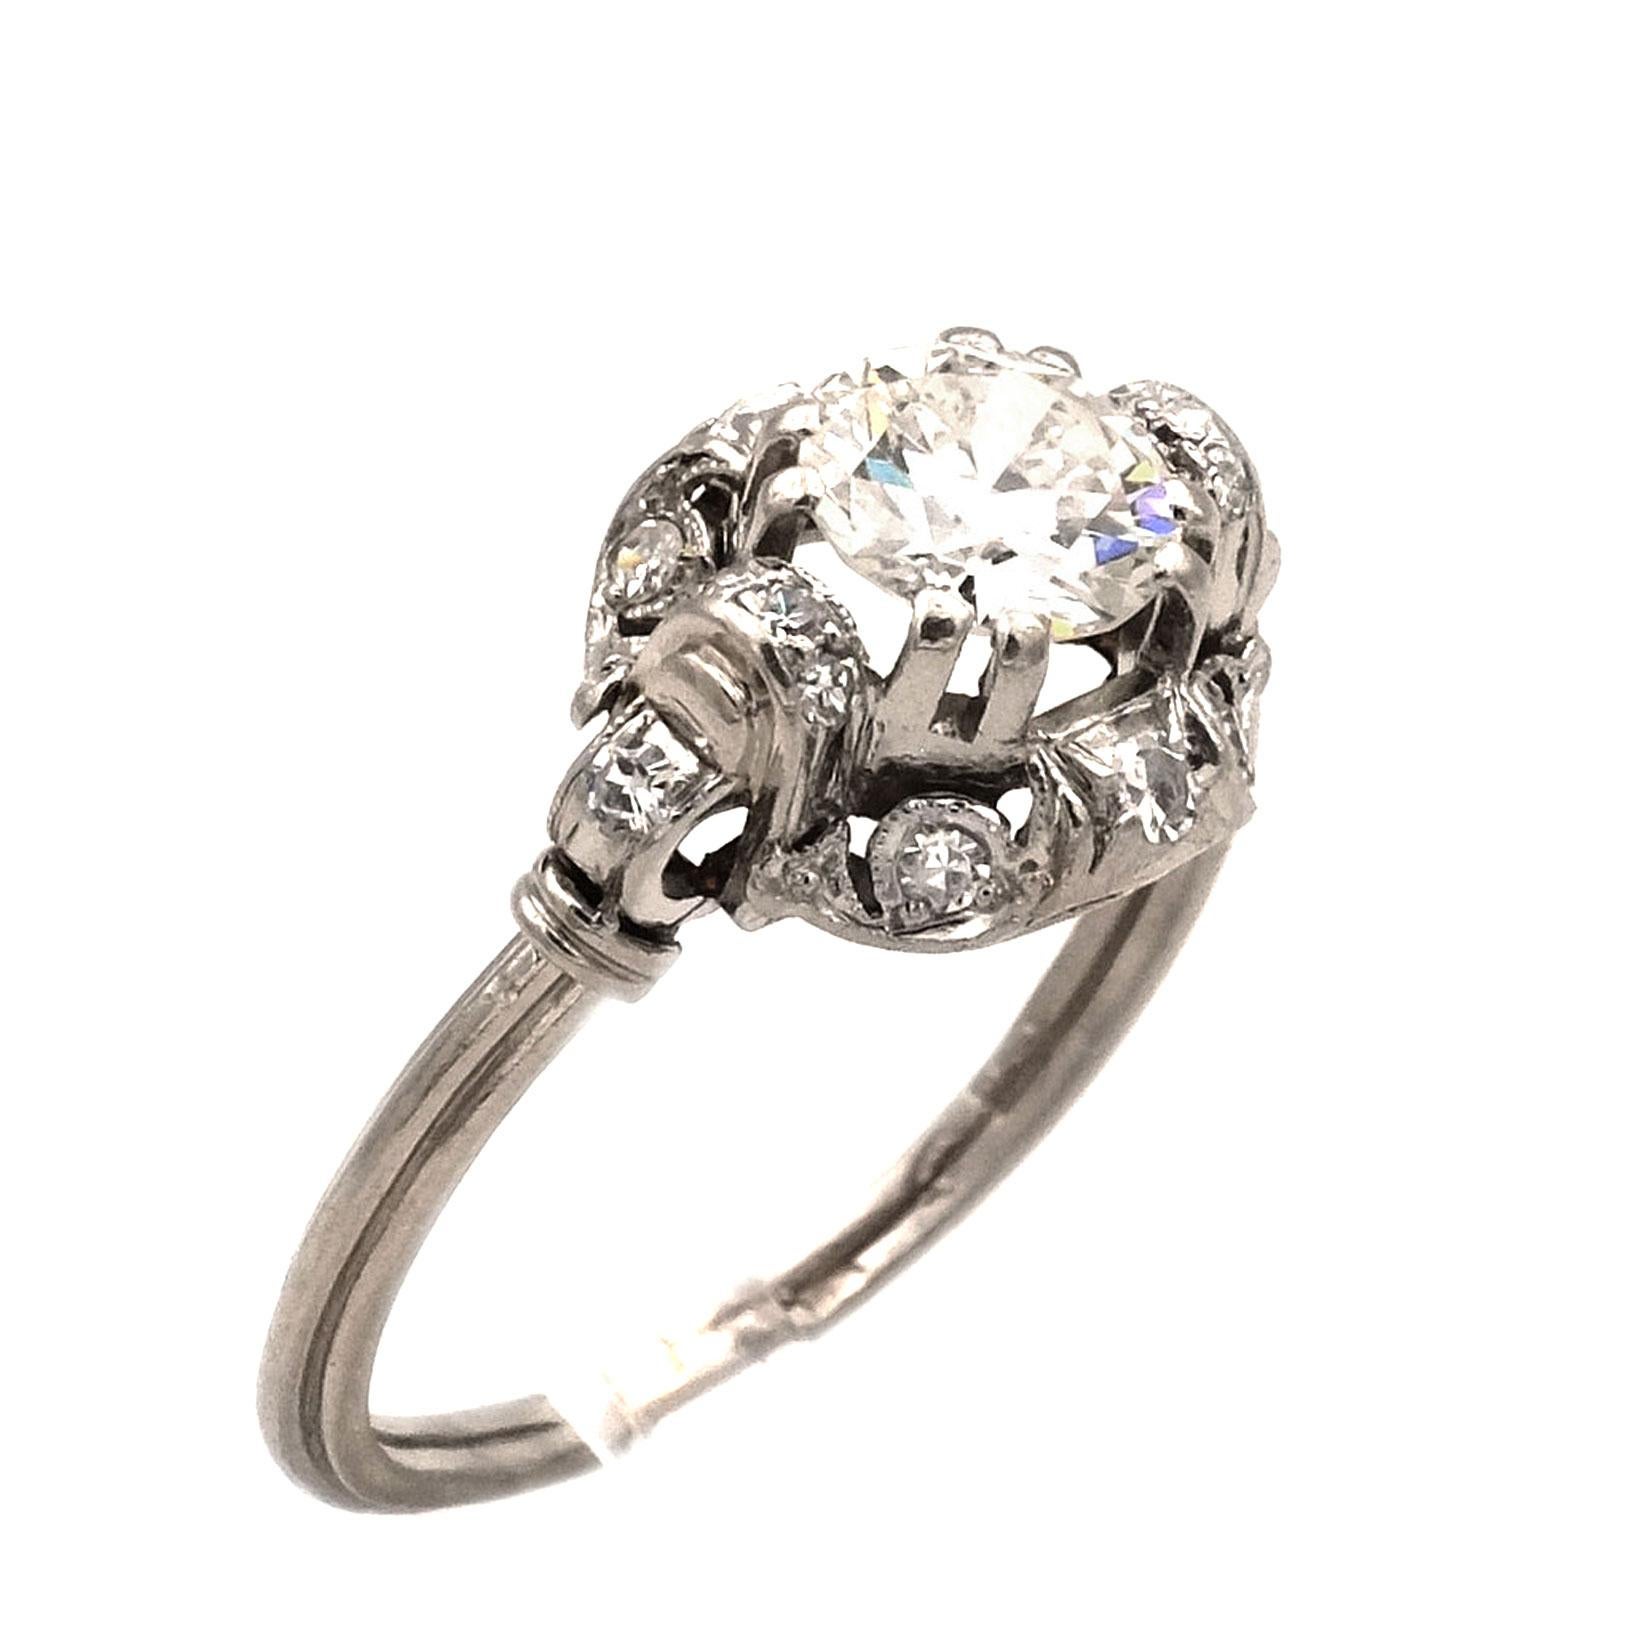 Art Deco 1.08 Carat Diamond Platinum Ring, circa 1920

This attractive diamond engagement ring features one round brilliant cut diamond of approx. 0.8 ct (G/VVSI) in an entourage of 14 further diamonds of approx. 0.28 ct. The 15 diamonds of the